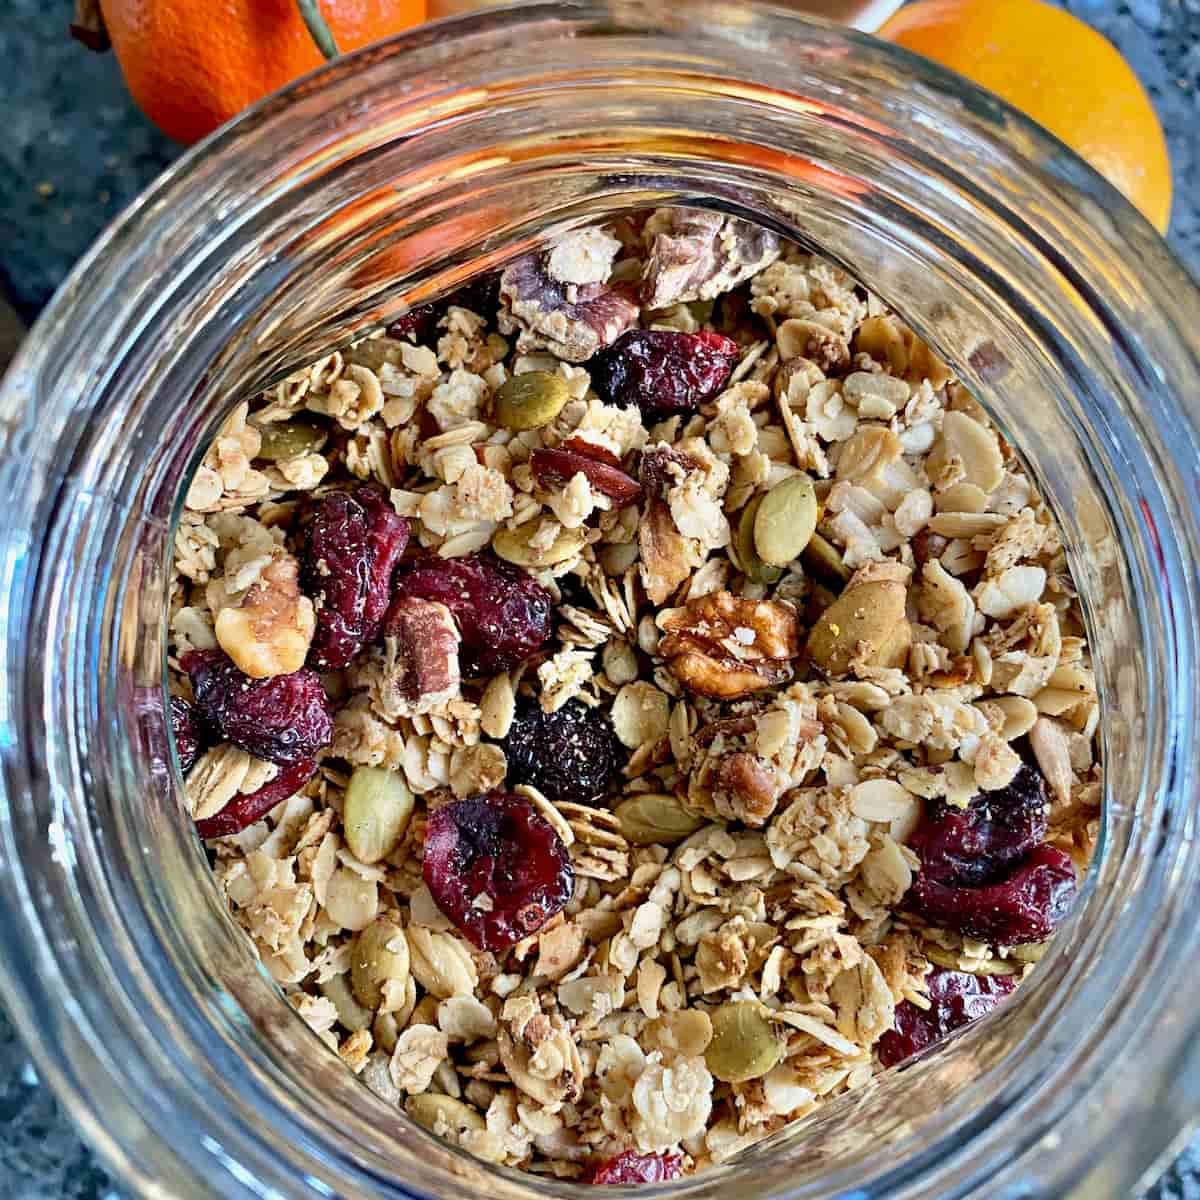 large jar of homemade granola containing walnuts, seeds, oats and dried fruits